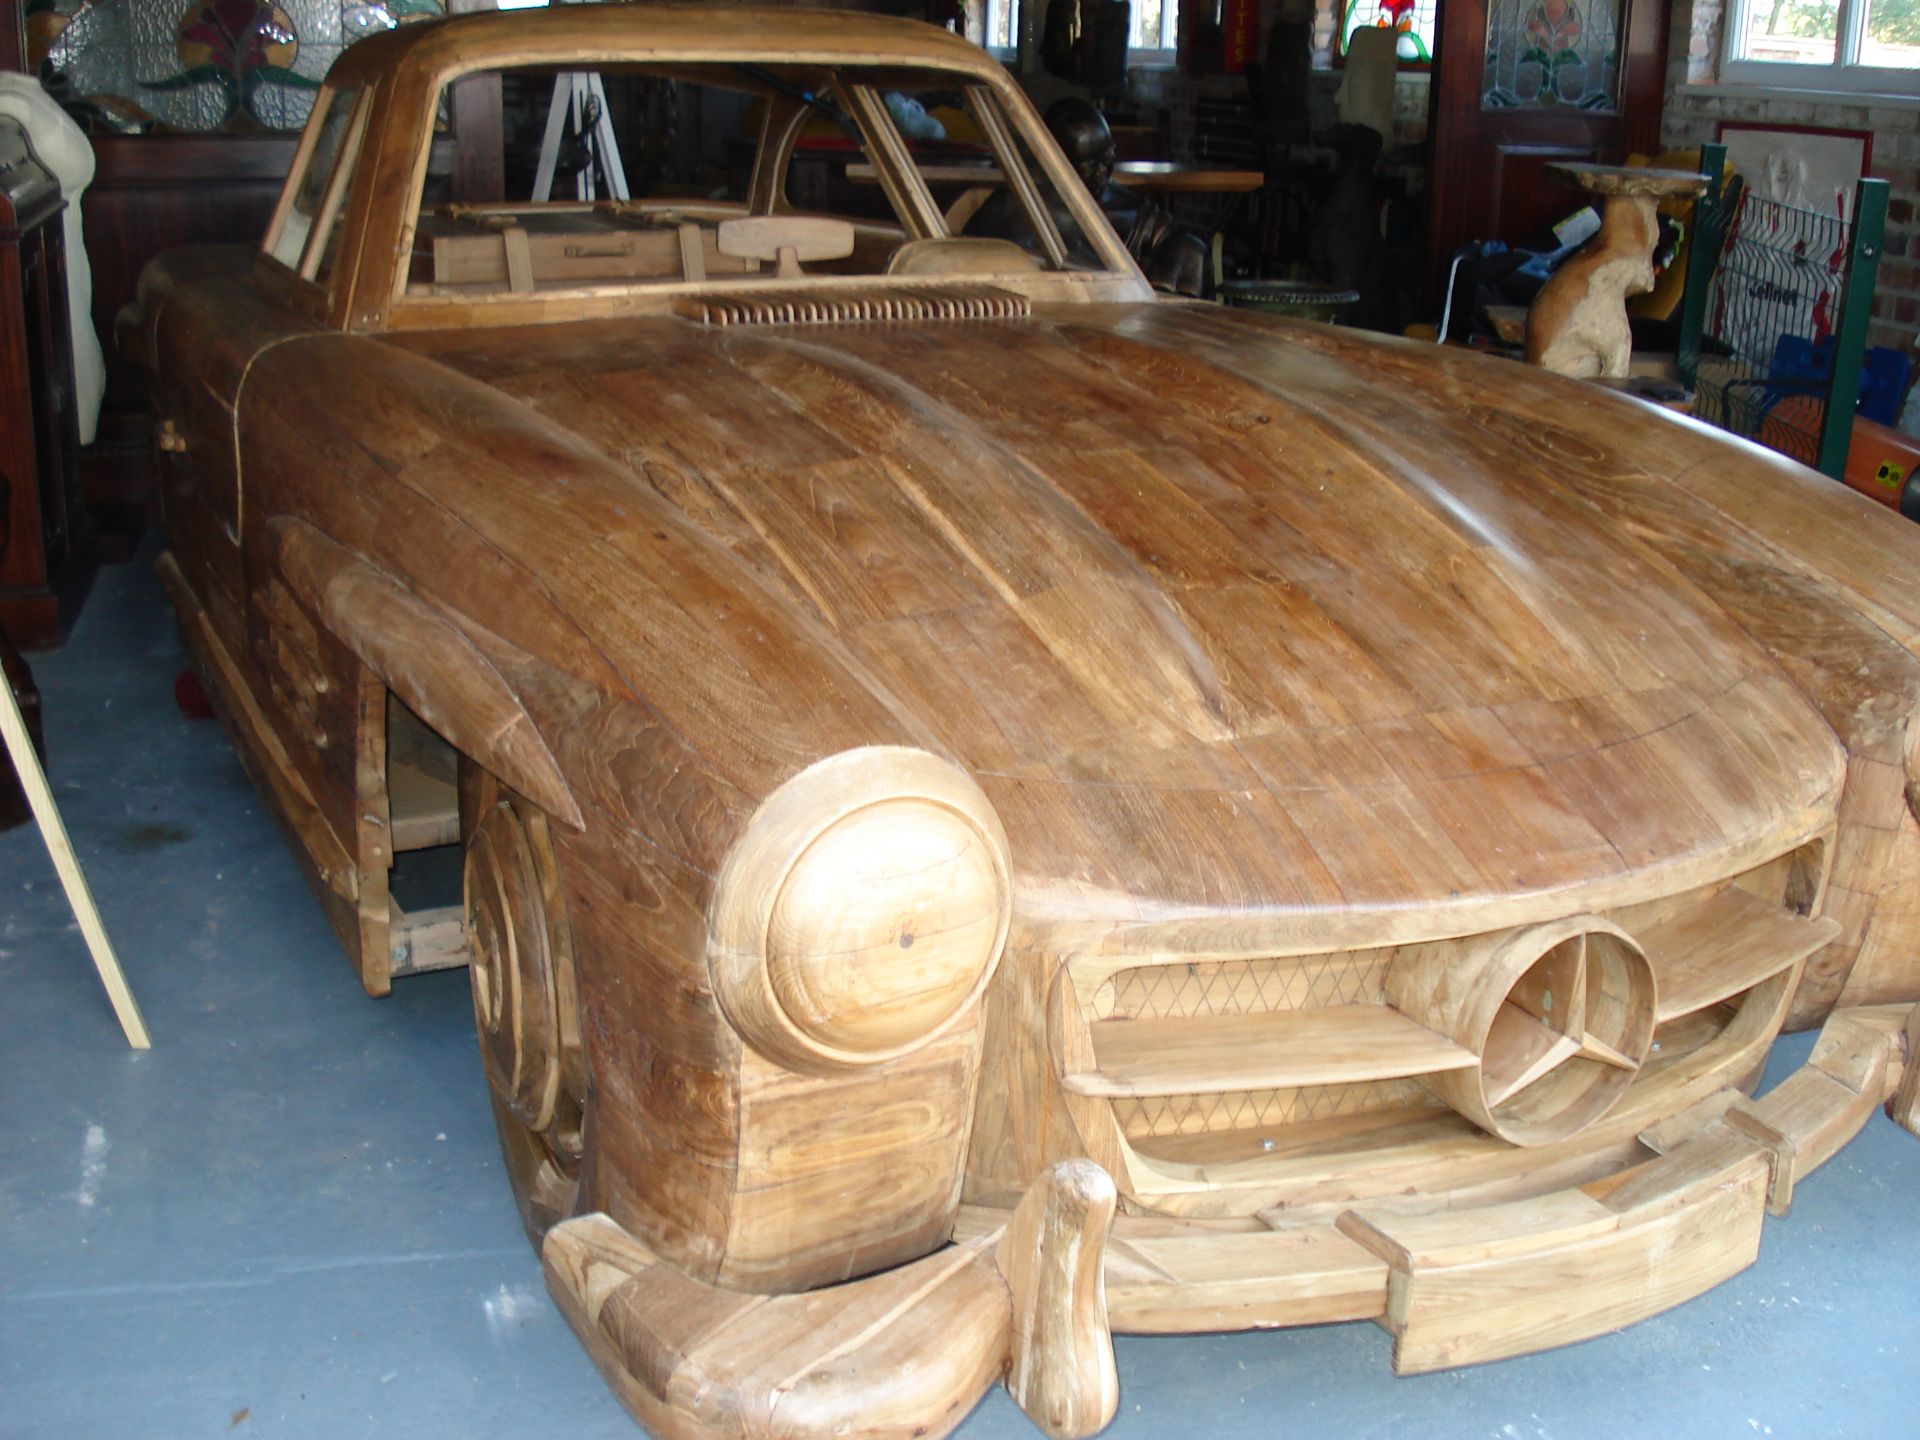 LIFESIZE HANDMADE EXCEPTIONAL SOLID TEAK UNIQUE MERCEDES BENZ GULLWING  Appraisal:  Serial No: - Image 5 of 8